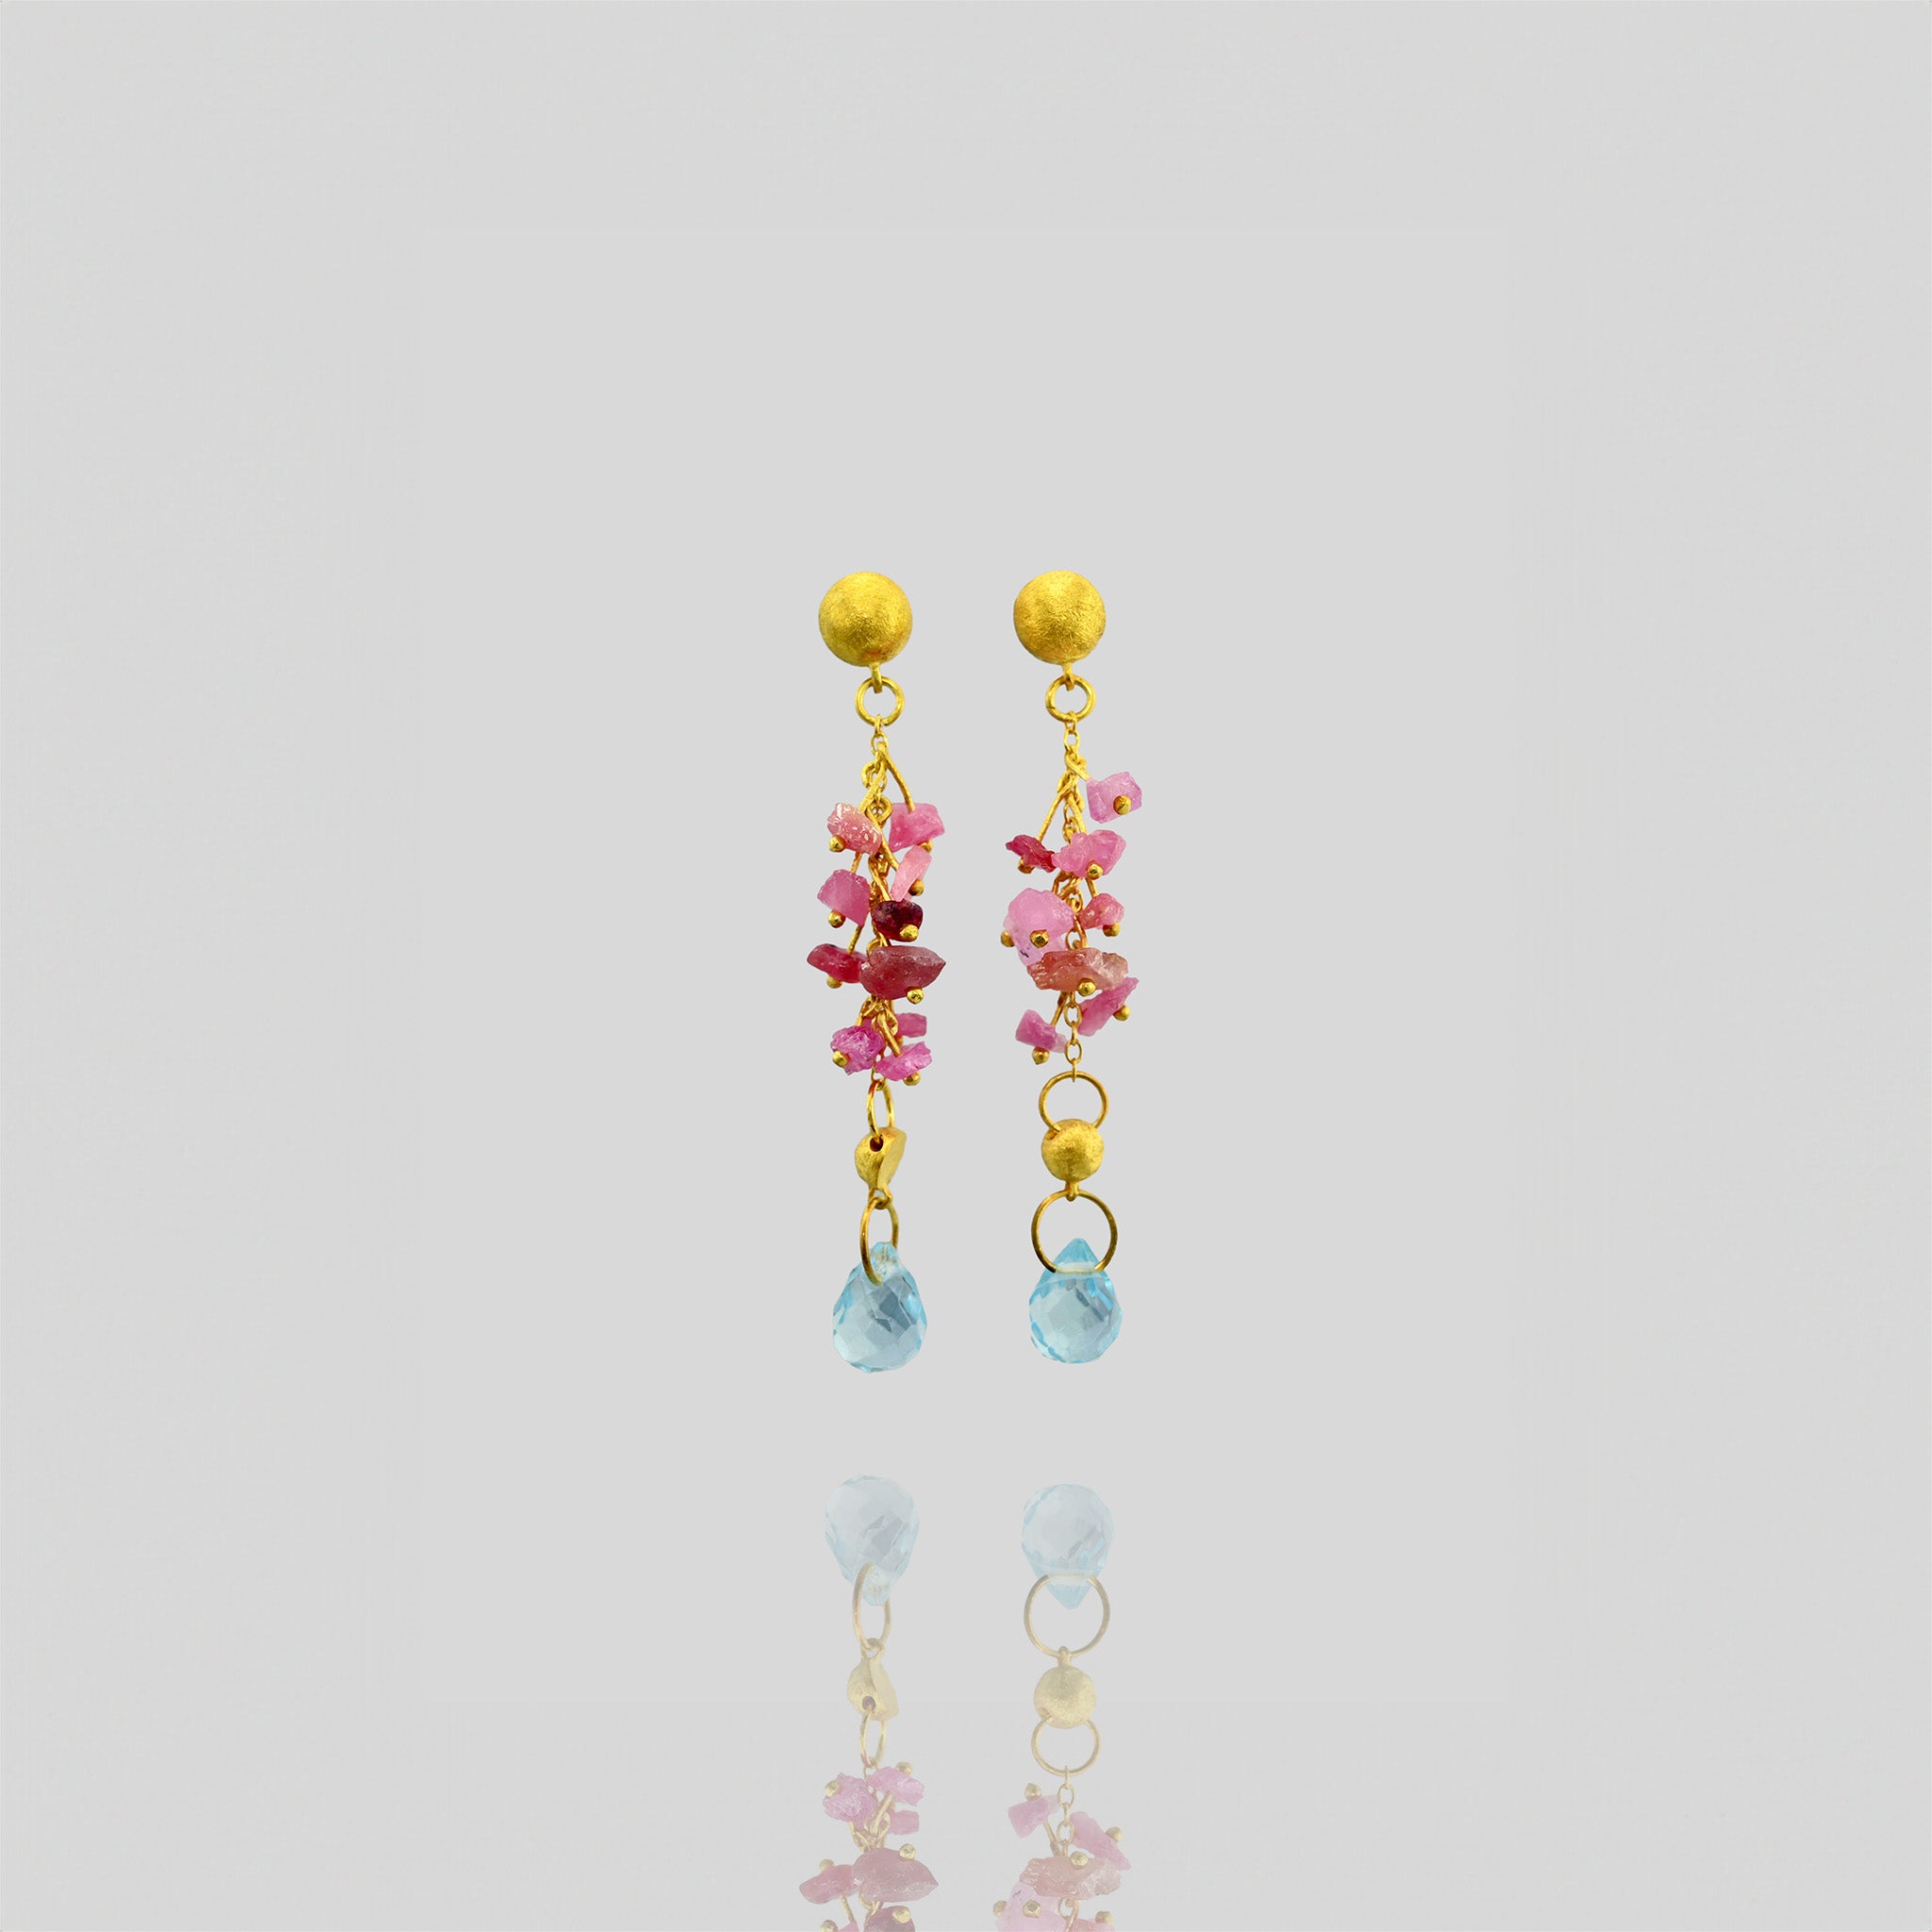 Elegant Venus Gold Earrings with Raw Pink Sapphires & Blue Topaz Drop - Unique Half Cap and Fine Gold Threads Design.